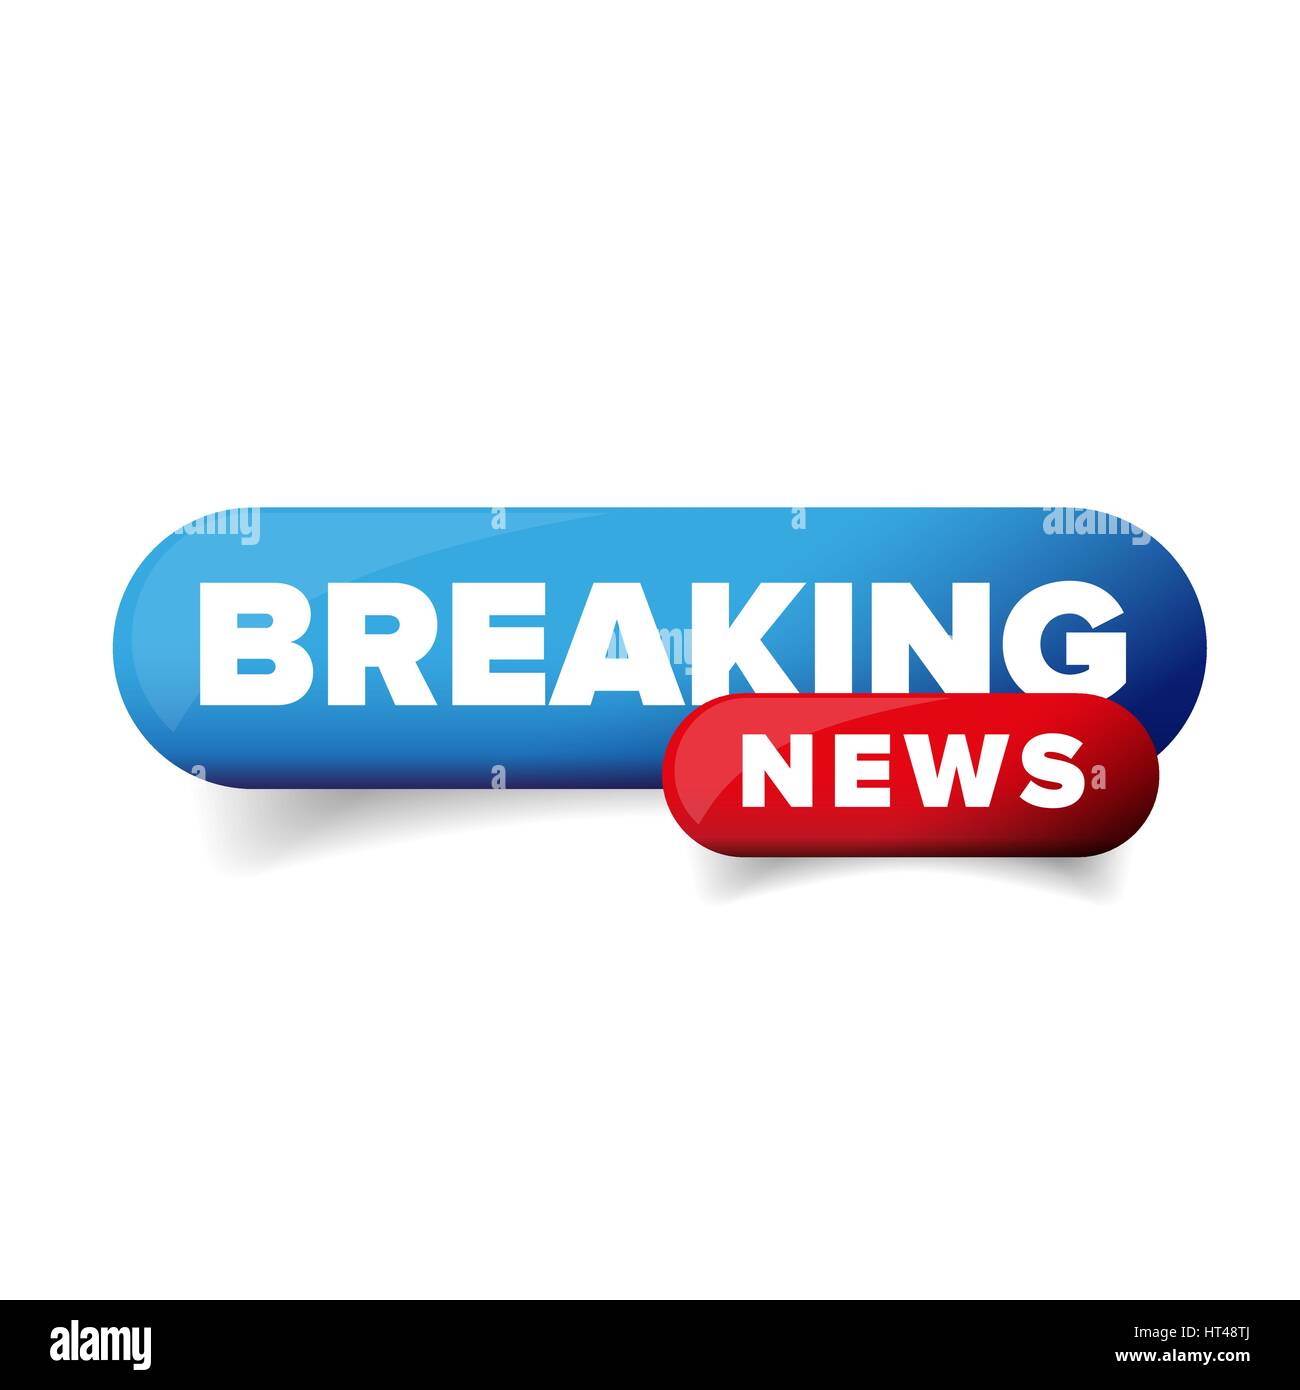 771 Background Breaking News Logo For FREE - MyWeb